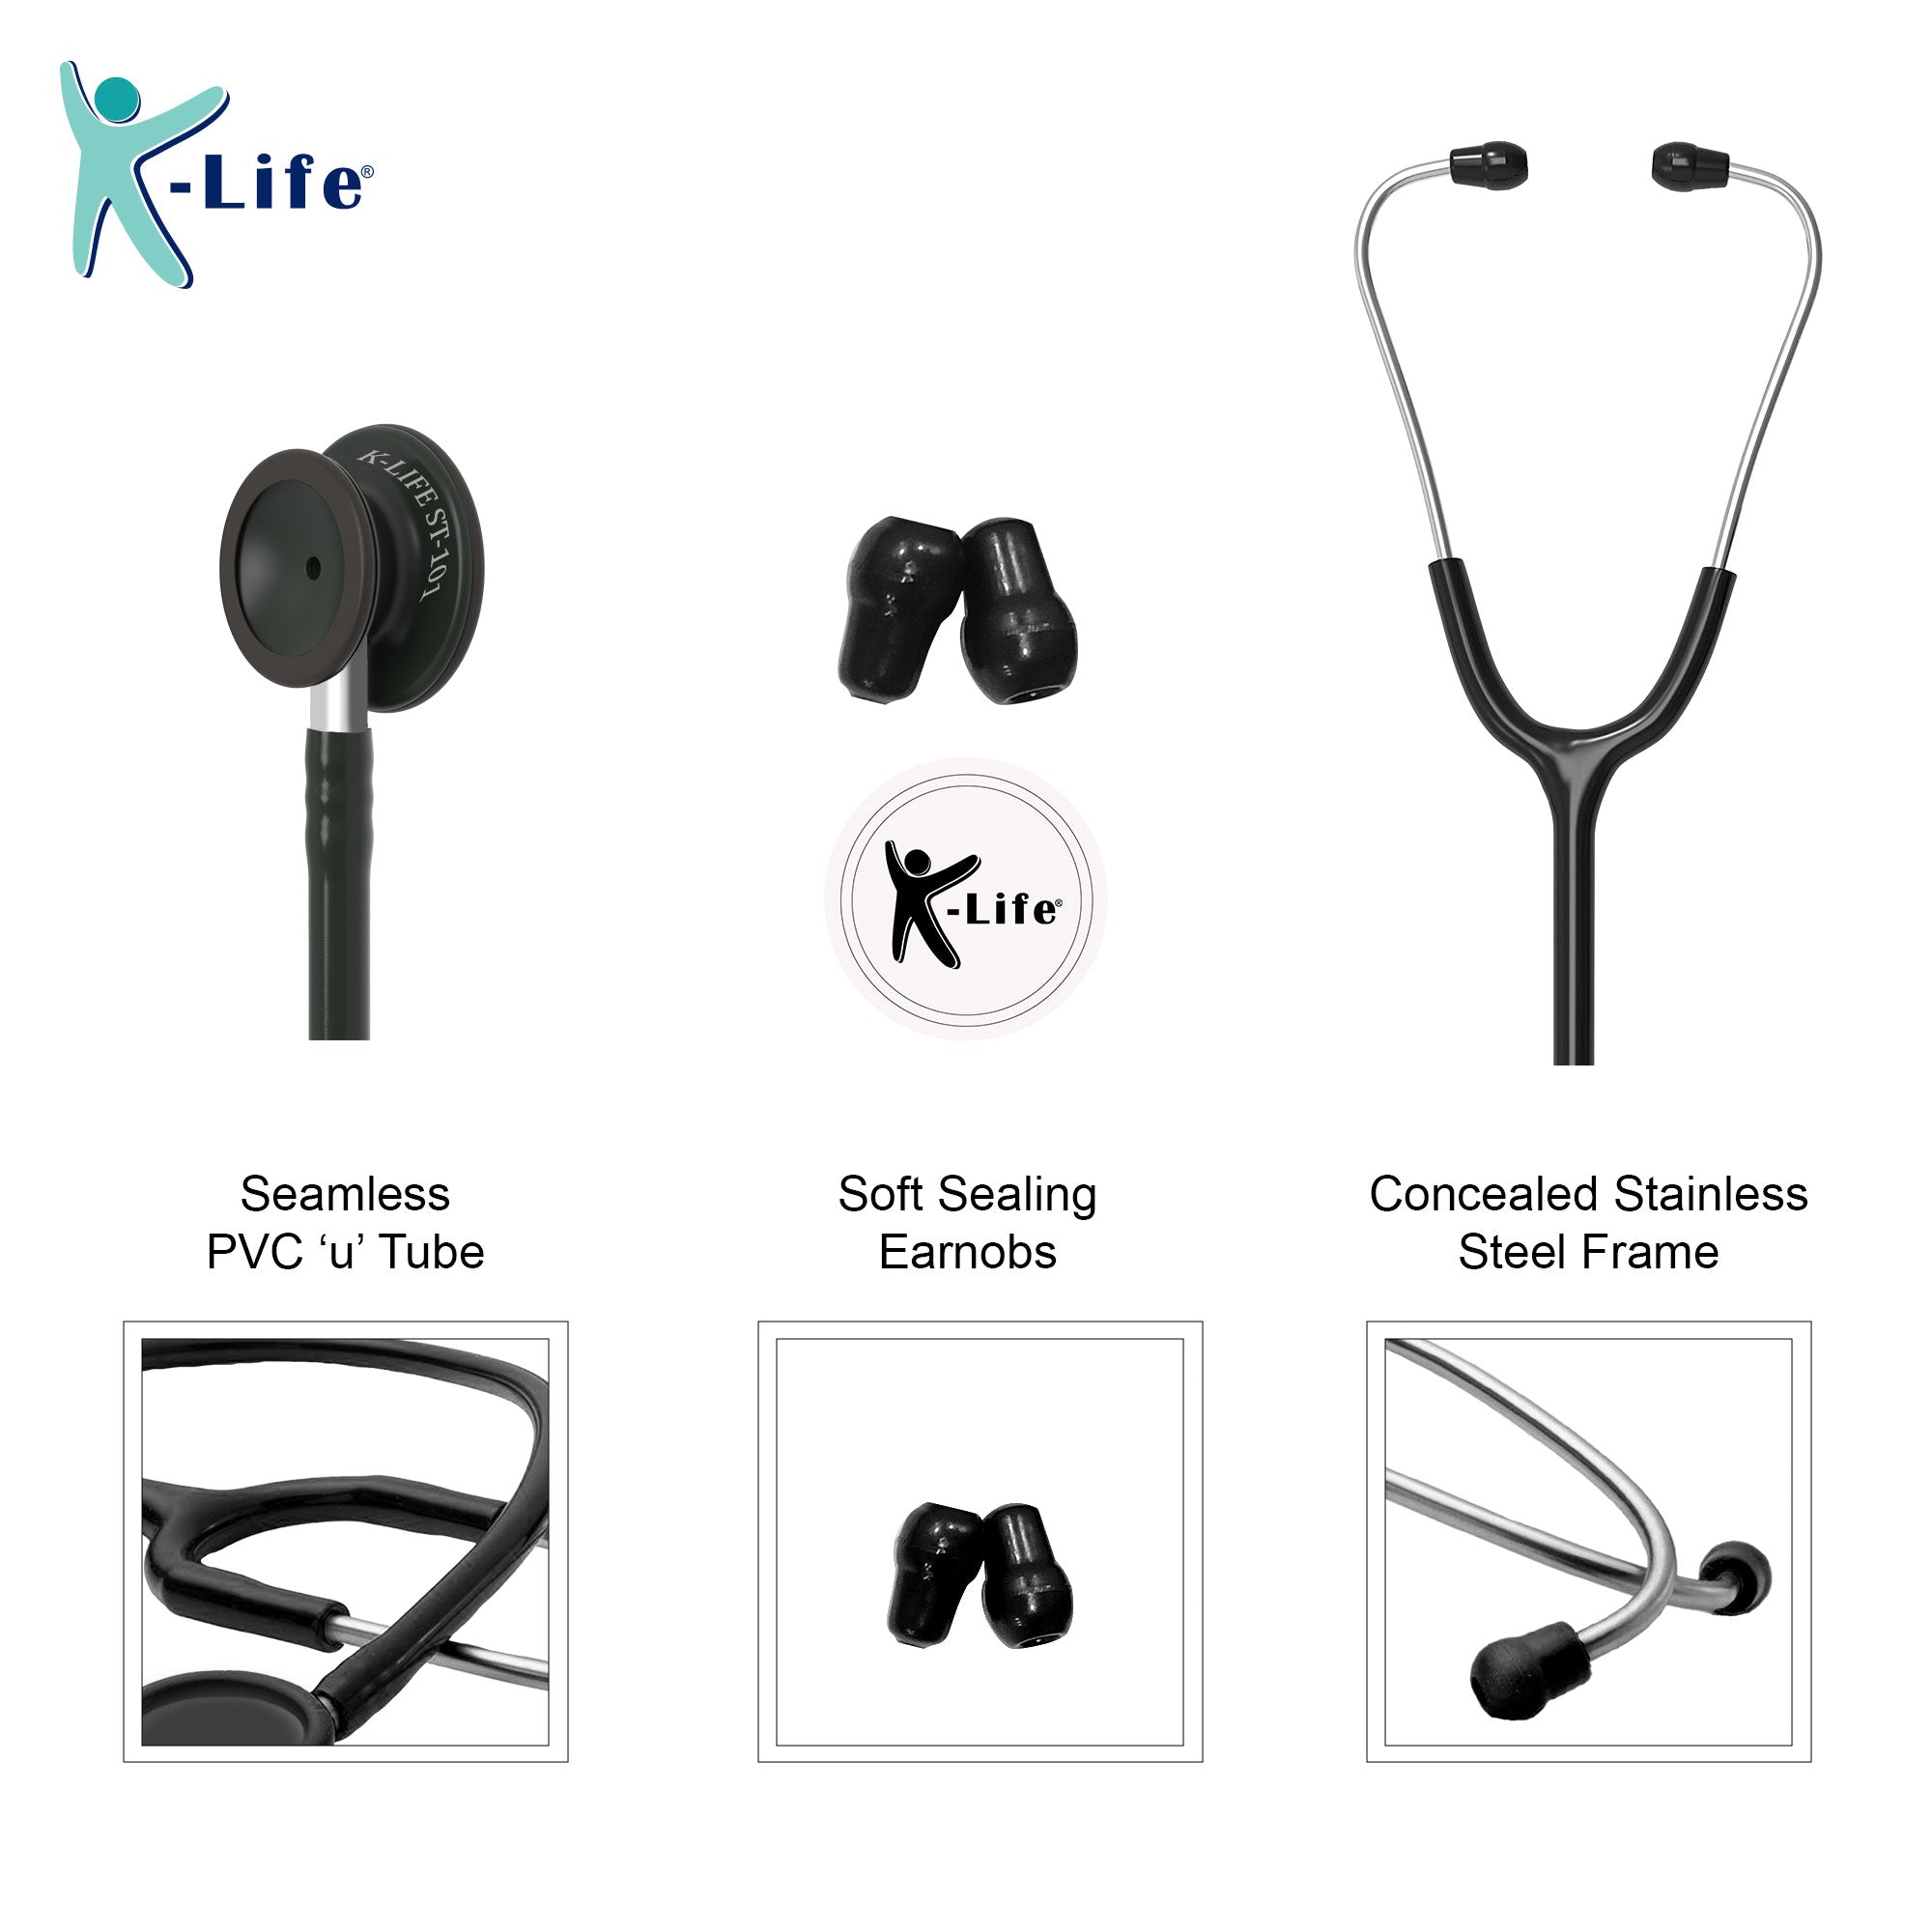 K-life ST-100 Professional Single head Chest Piece for medical students nurses doctors Acoustic Stethoscope